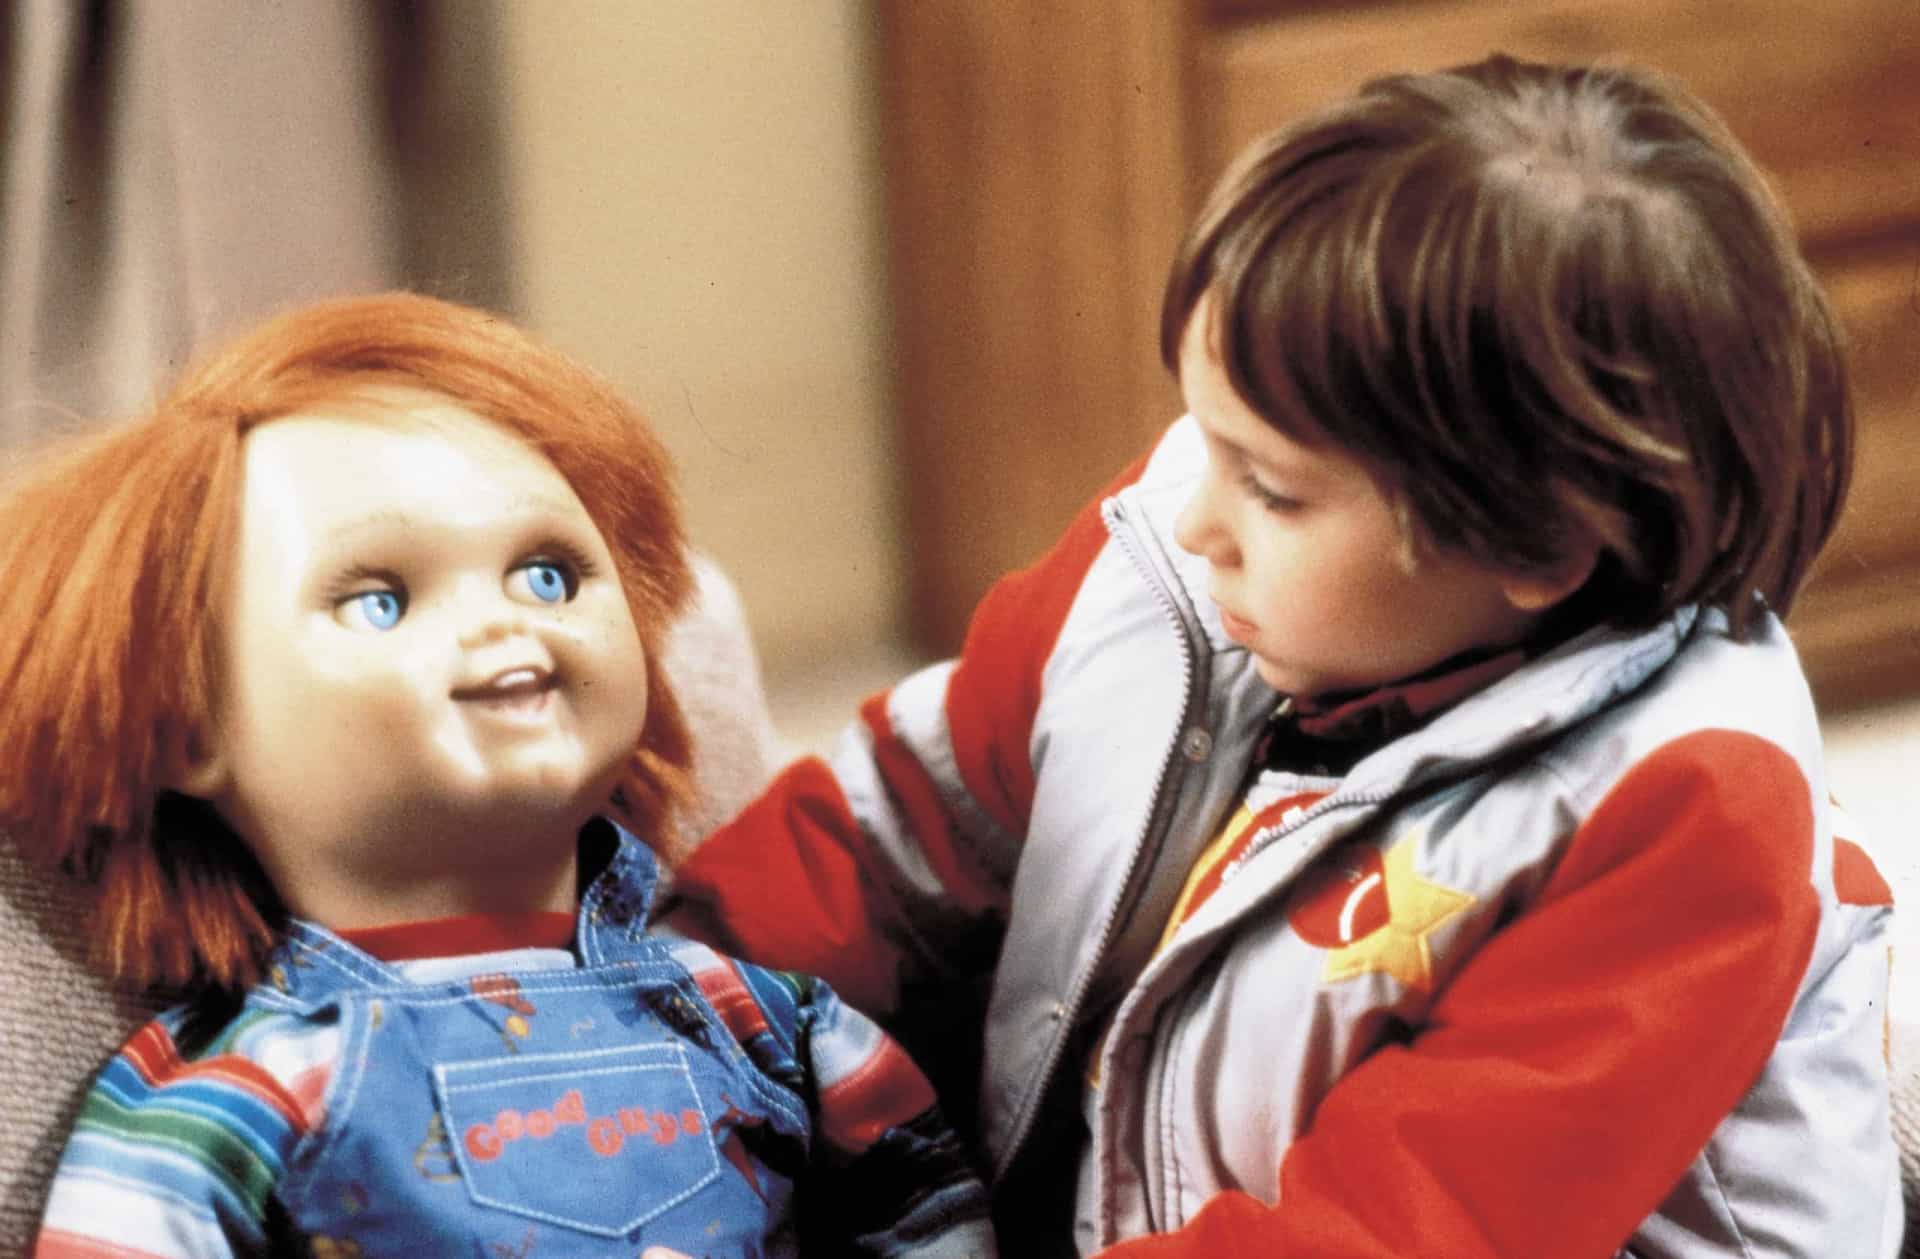 <p>This is probably the 'Child's Play' most people are familiar with. The supernatural horror film revolves around an evil doll named Chucky, who is possessed by the spirit of a serial killer.</p><p>You may also like:<a href="https://www.starsinsider.com/n/469964?utm_source=msn.com&utm_medium=display&utm_campaign=referral_description&utm_content=519875en-us"> Unexpected signs you'll be successful in life</a></p>